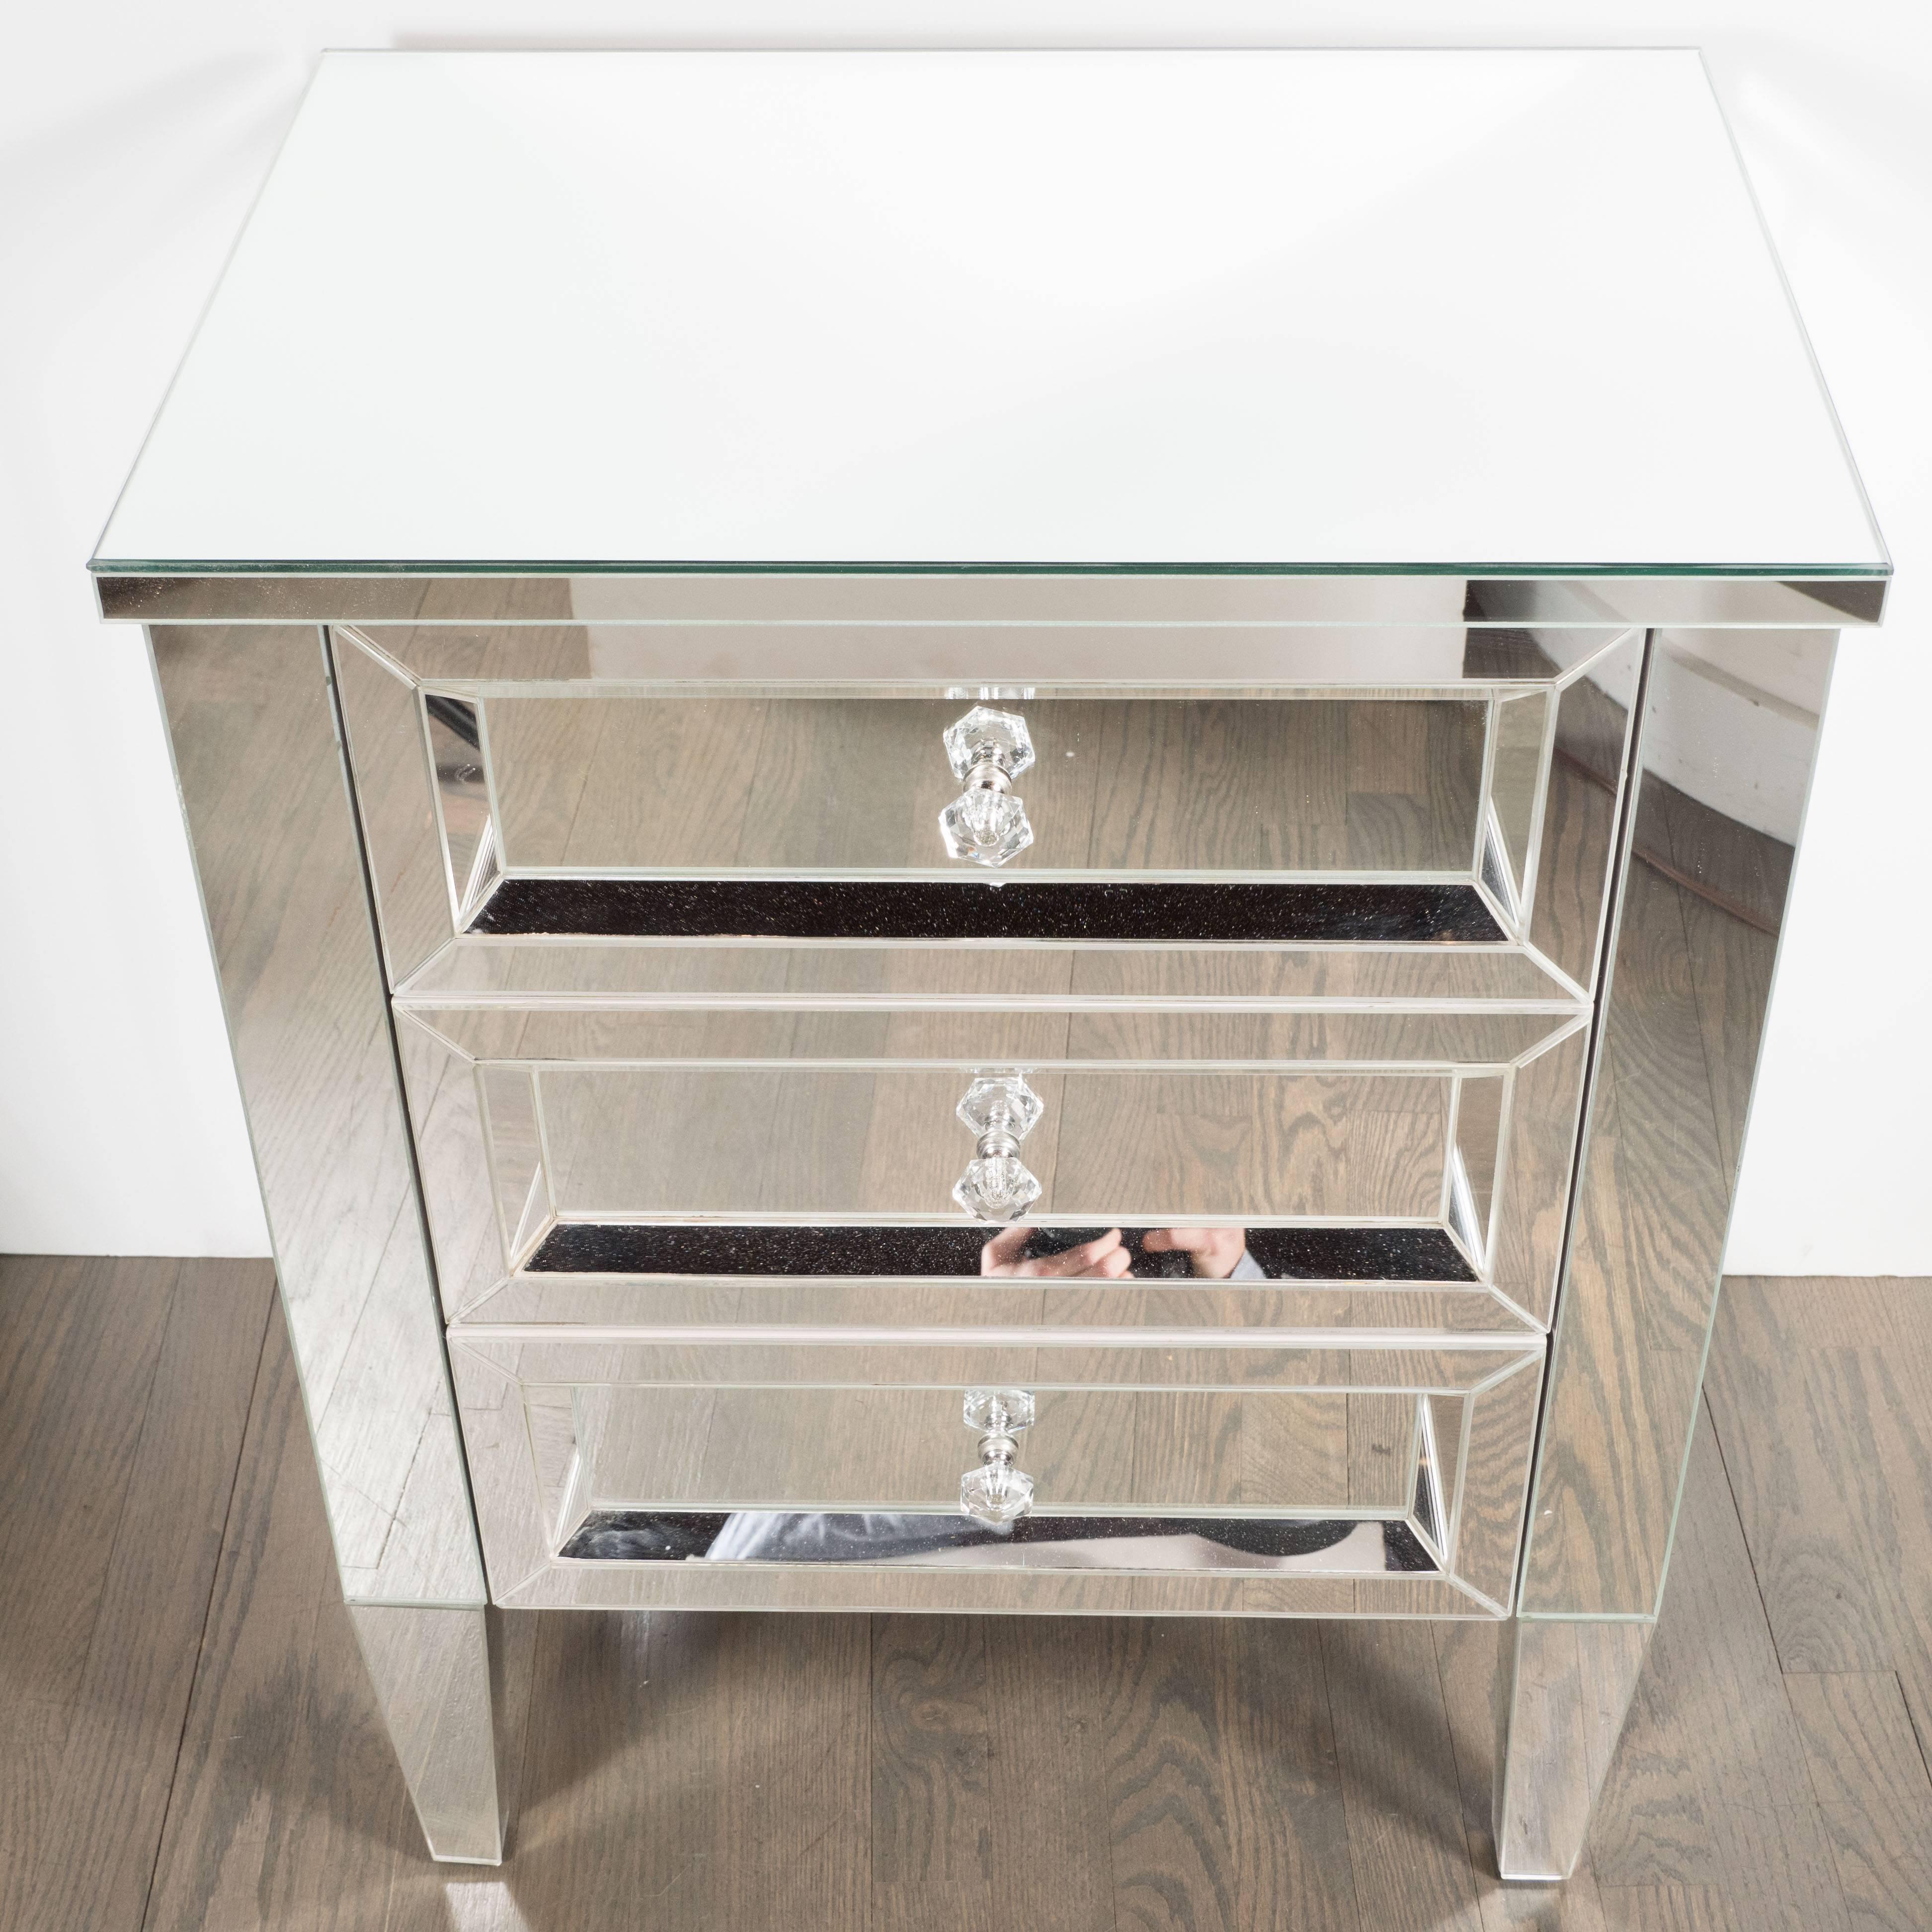 This stunning pair of Hollywood Regency inspired nightstands were custom-made by our exclusive atelier in New York. They embody the superlative craftsmanship, old world glamour, and attention to detail that we prize. Composed of mirrored glass, they